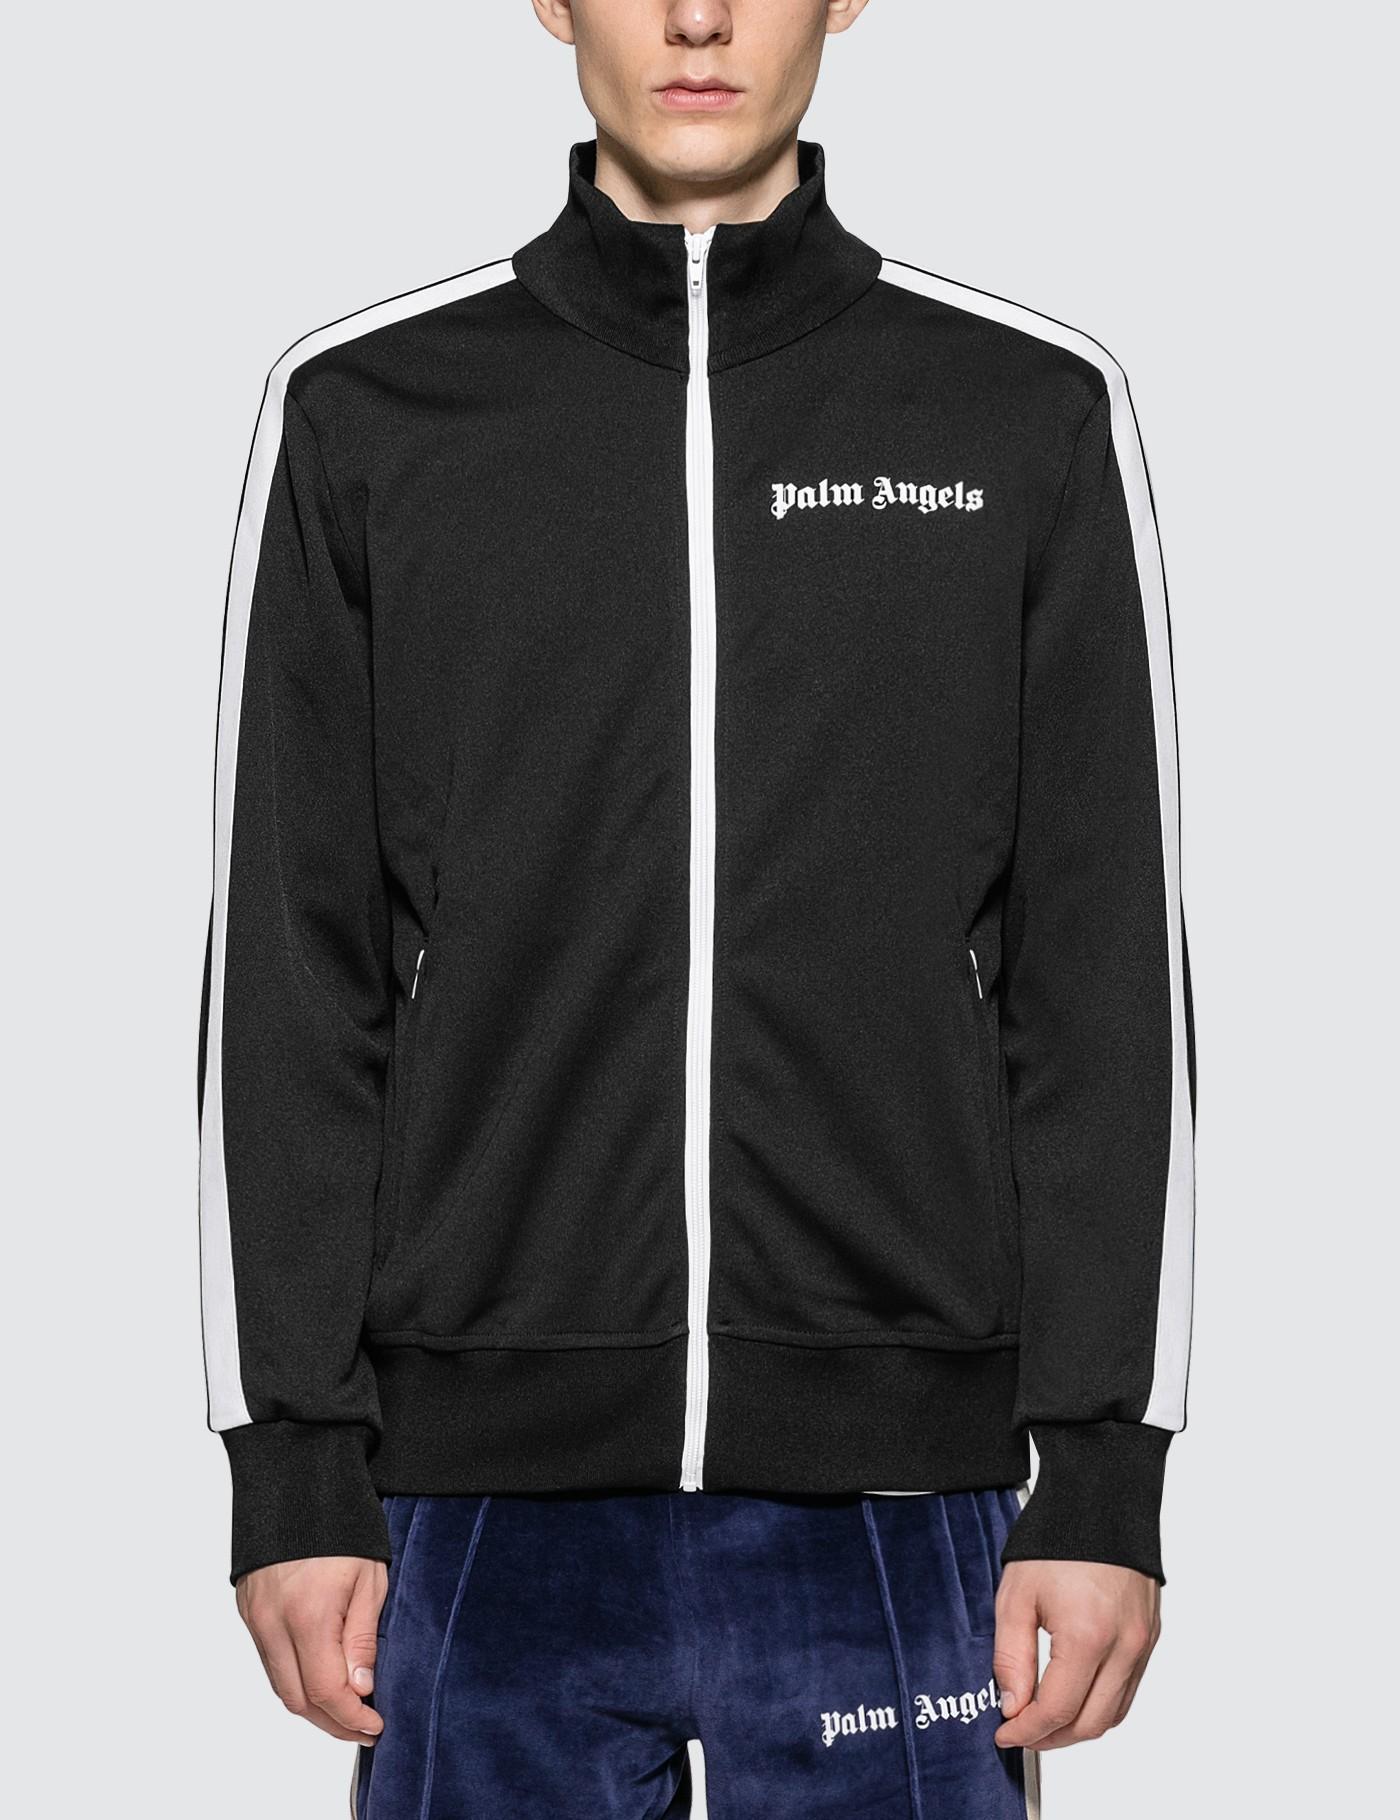 Palm Angels Synthetic Classic Track Jacket in Black for Men - Lyst